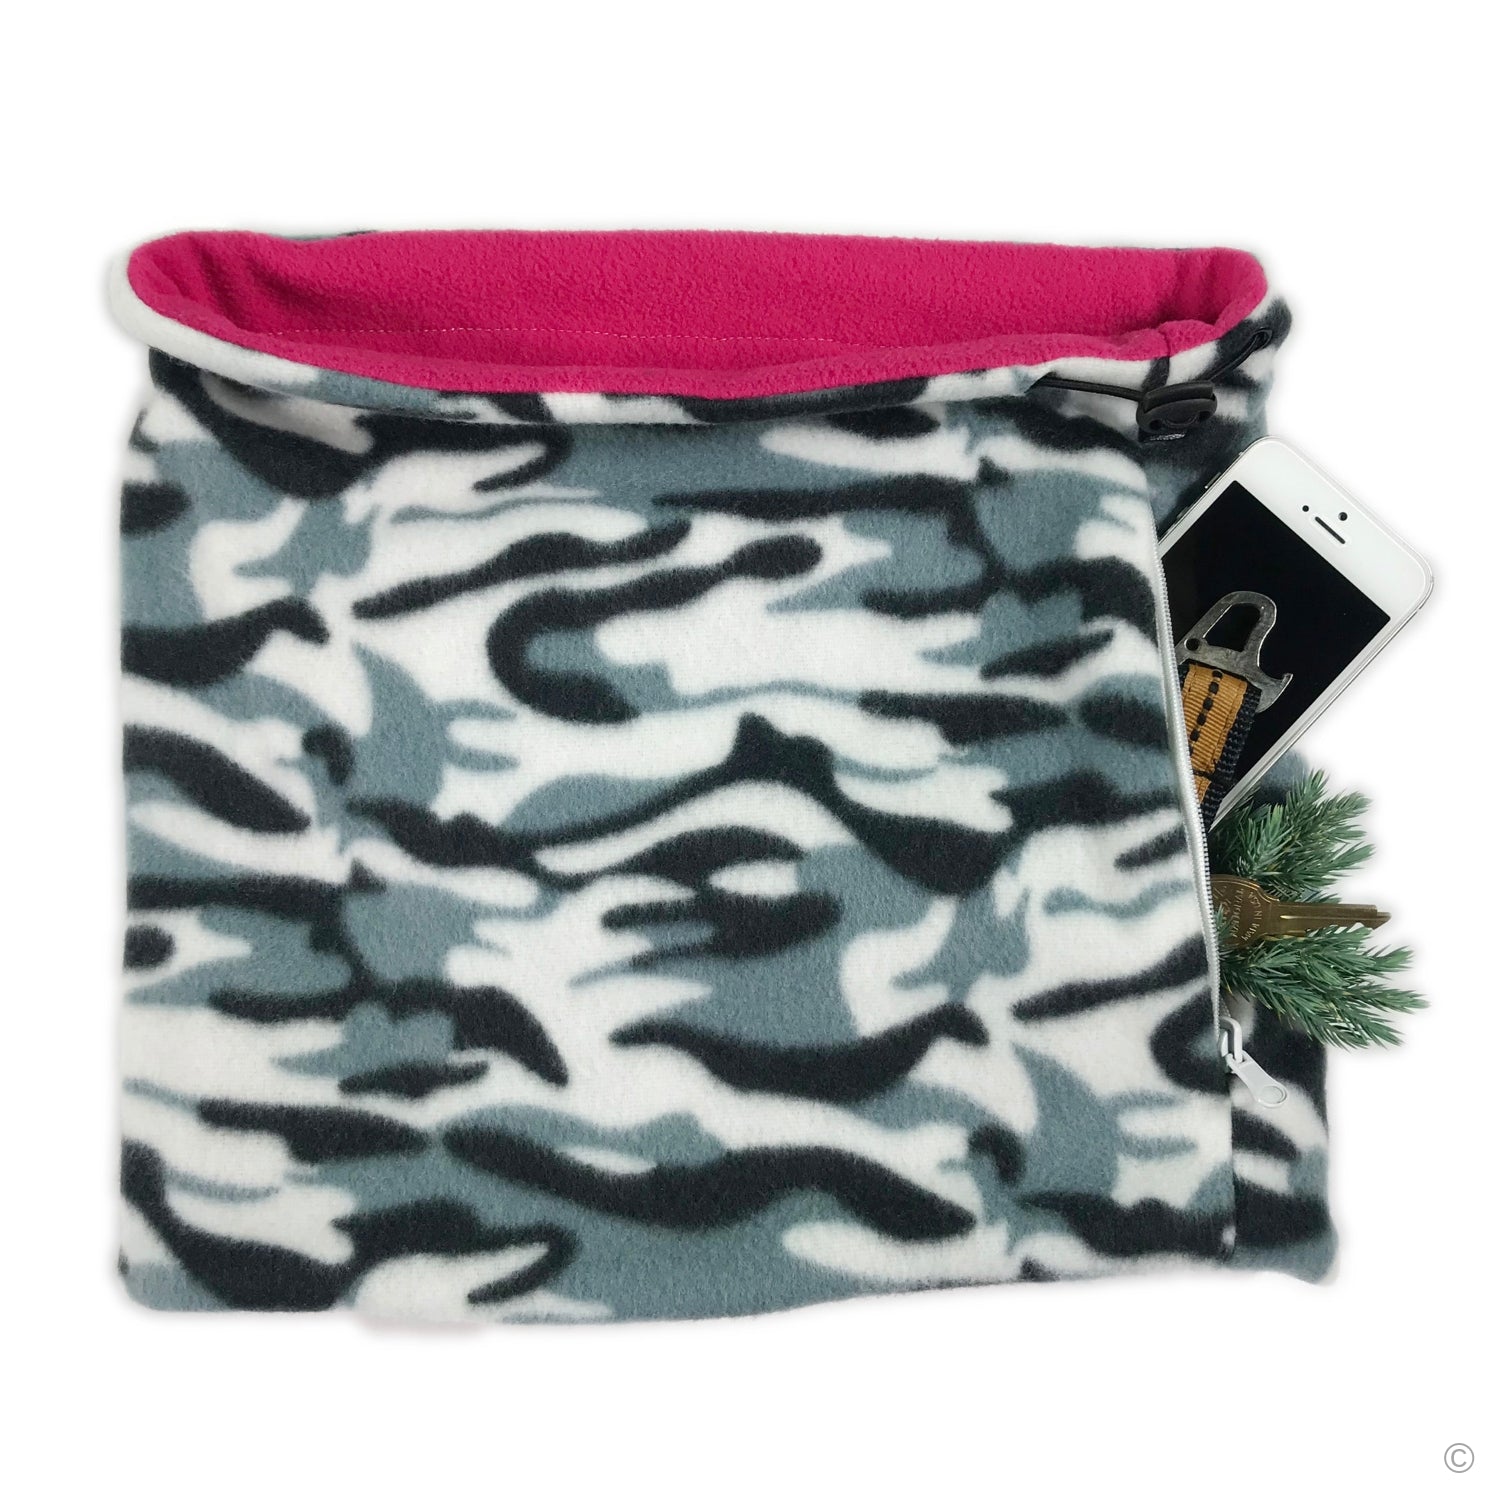 SHOLDIT Convertible Neck Gaiter with Pocket Camouflage Pink